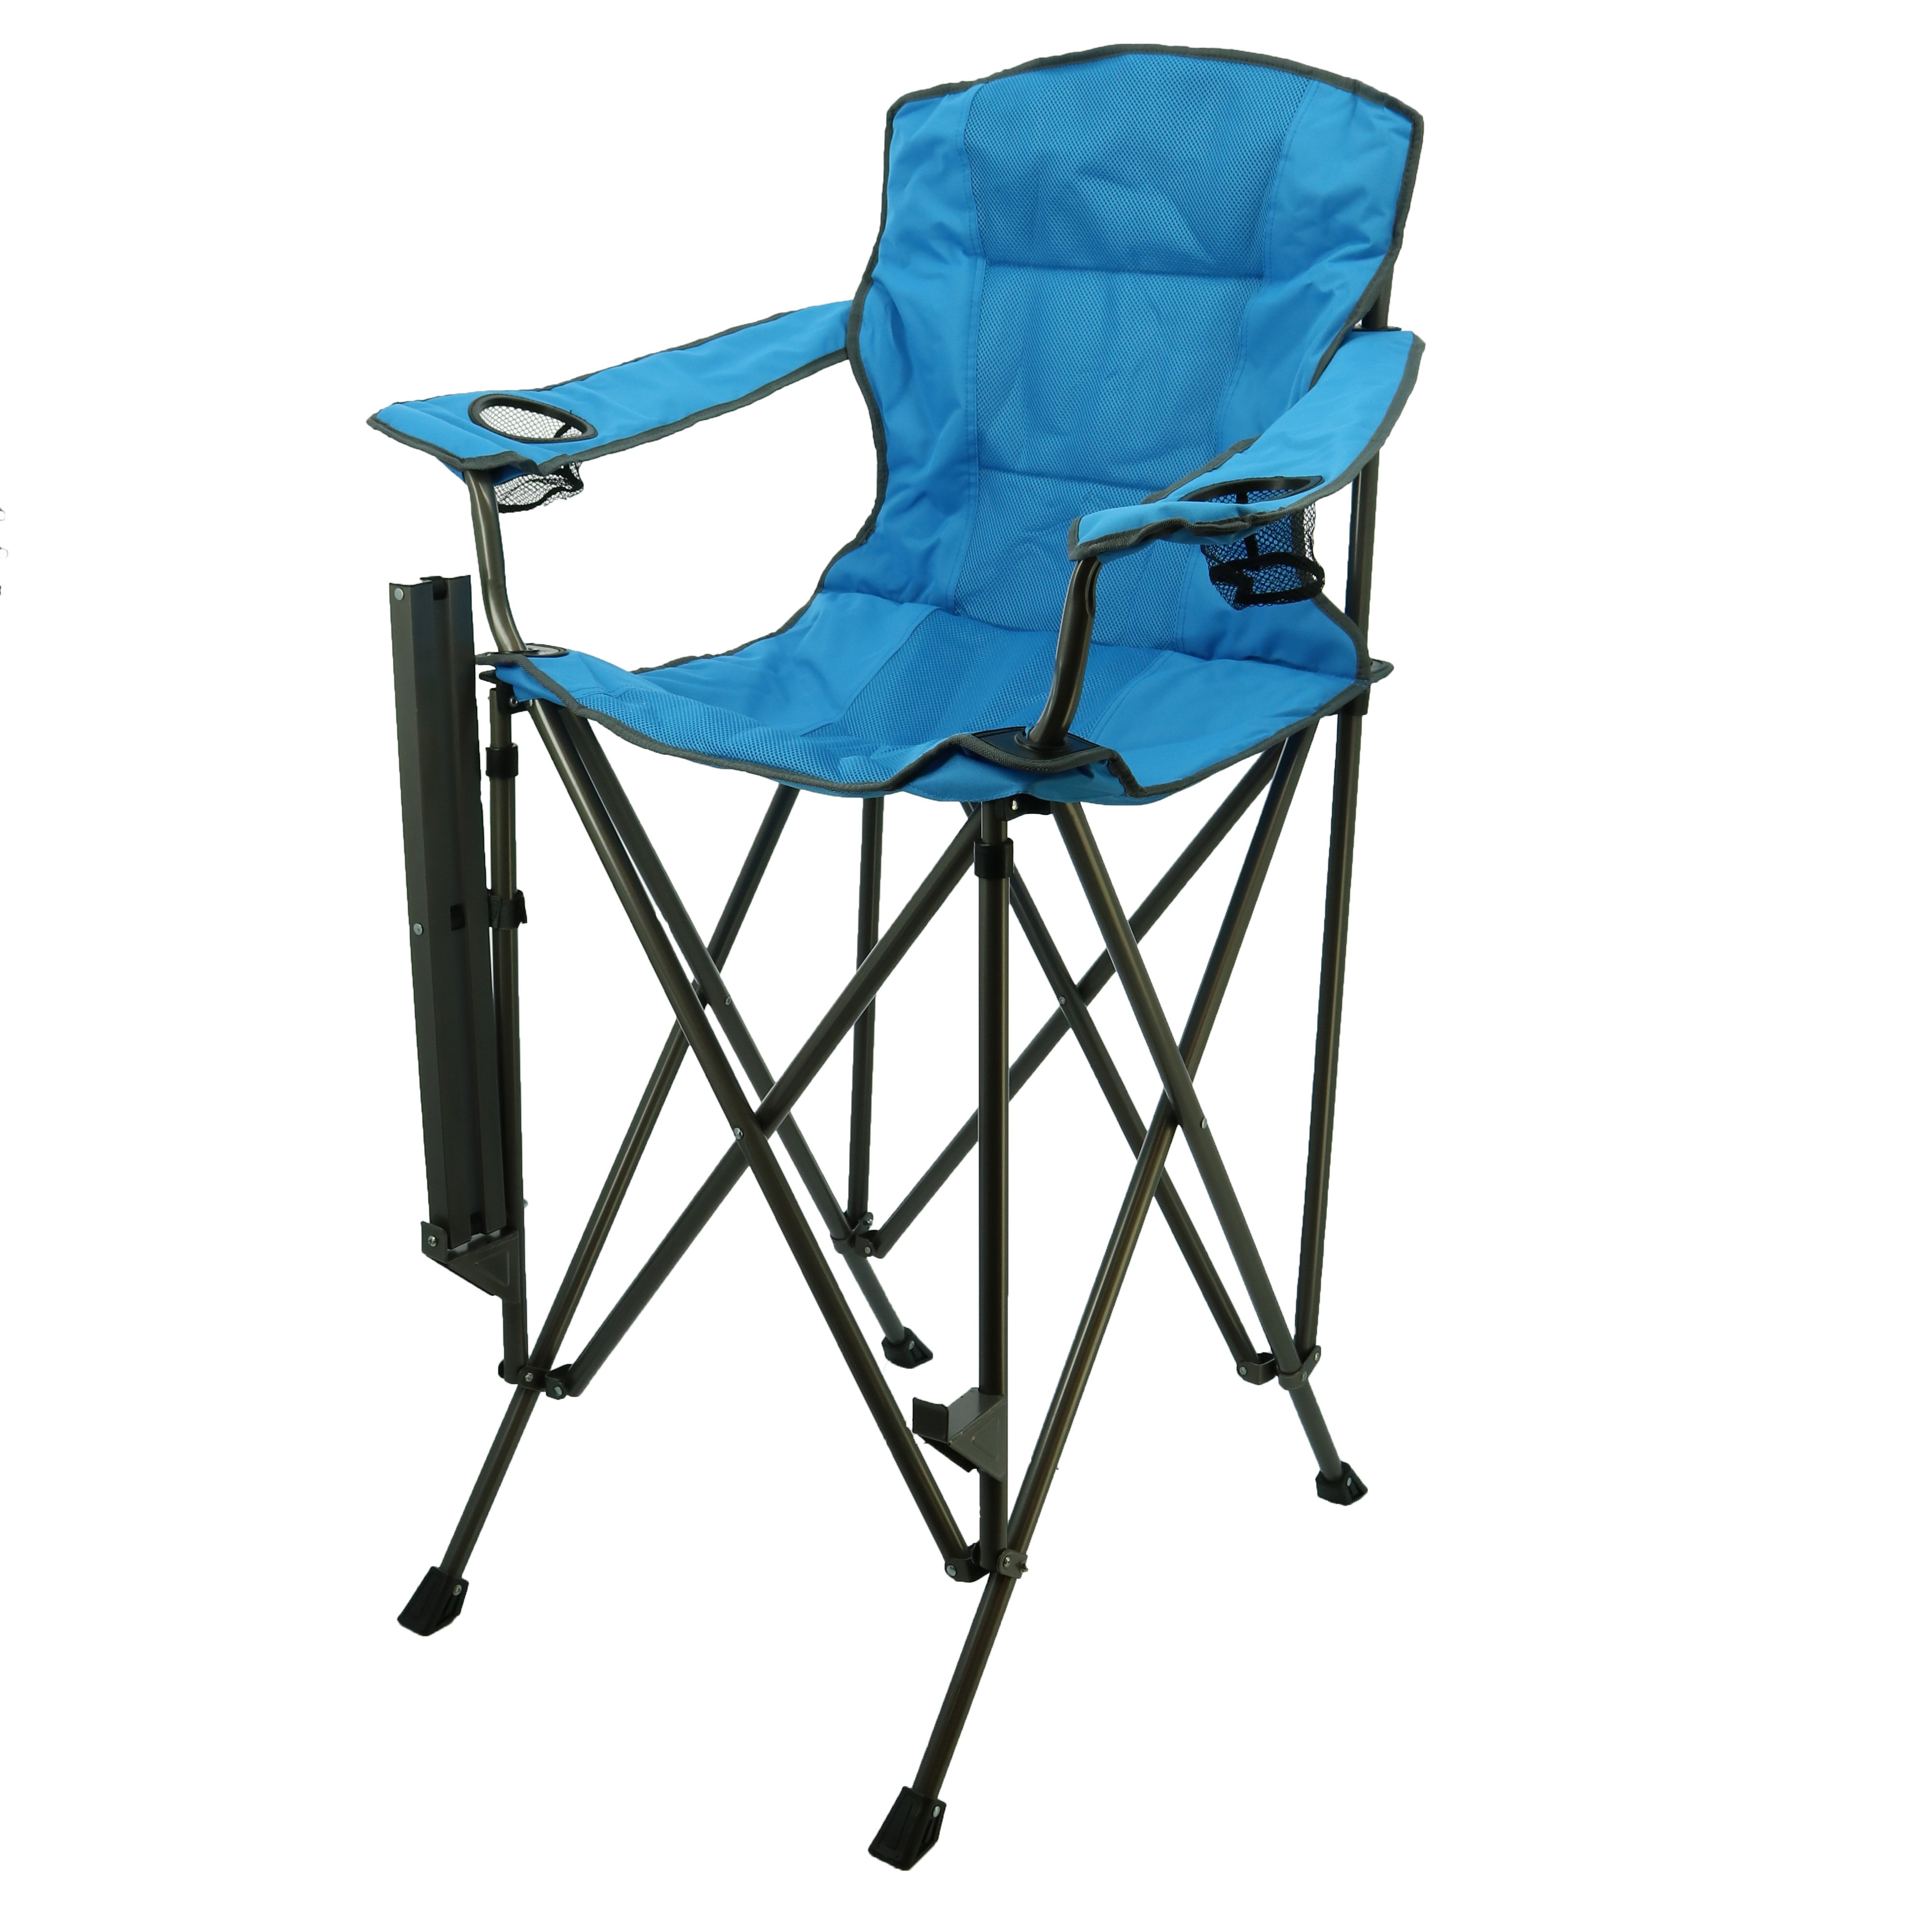 Outdoor Solutions Tall Boy Blue Folding Chair - Shop Chairs & Seating